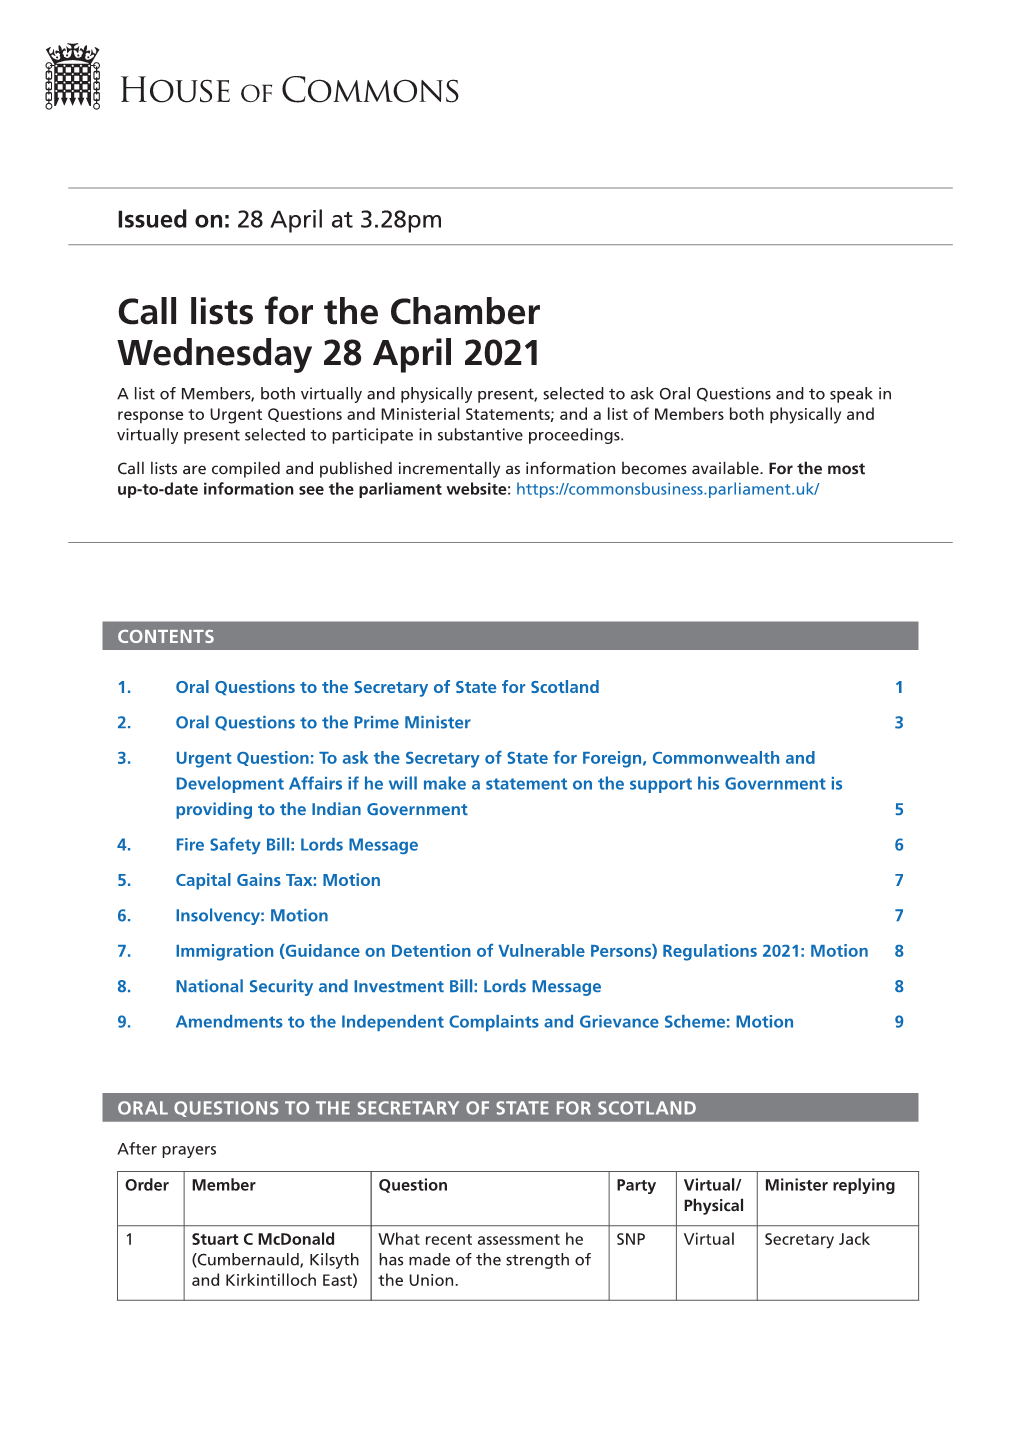 Call Lists for the Chamber Wednesday 28 April 2021